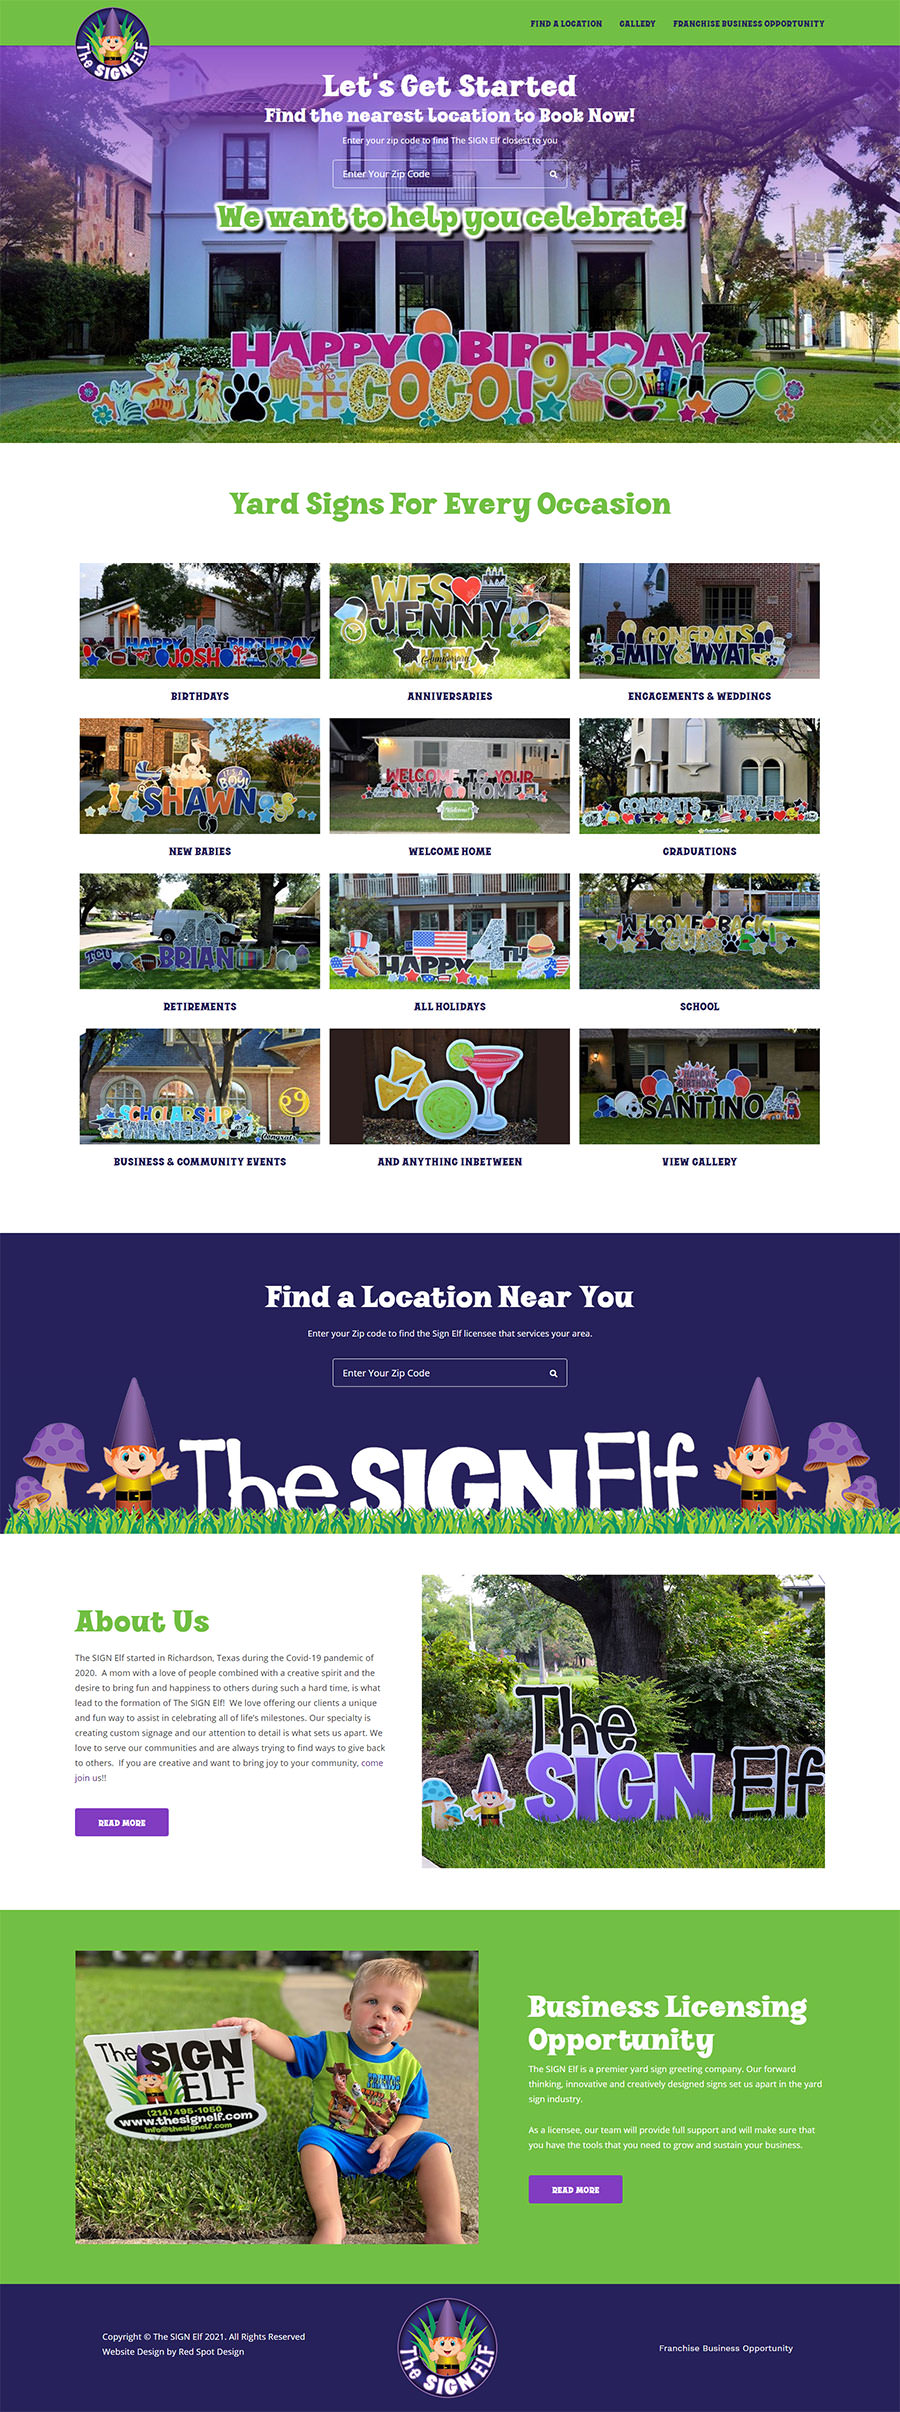 franchise web design for the sign elf dallas texas